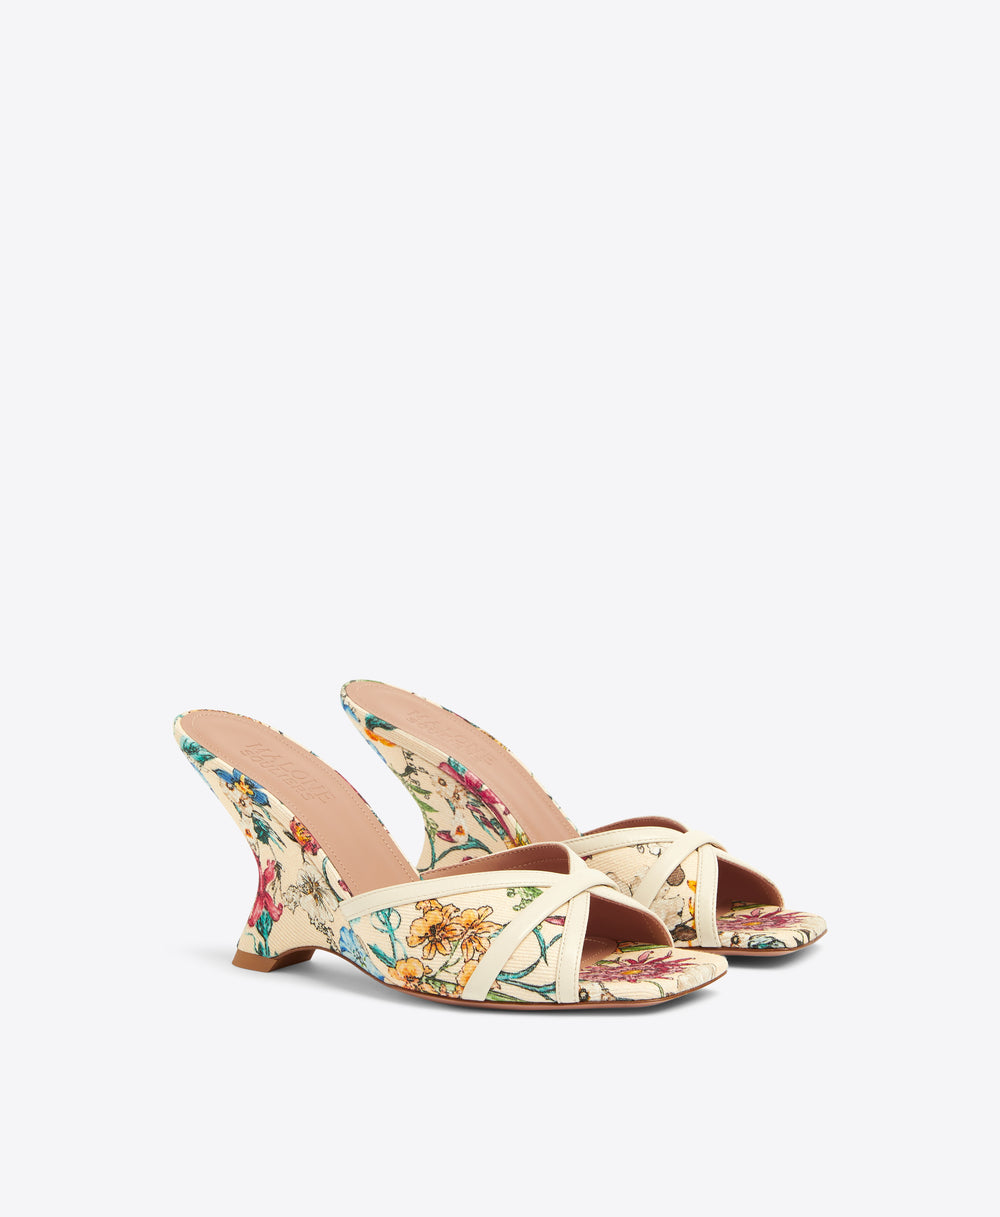 Perla 85 Floral Cream Canvas Wedge Sandals Malone Souliers